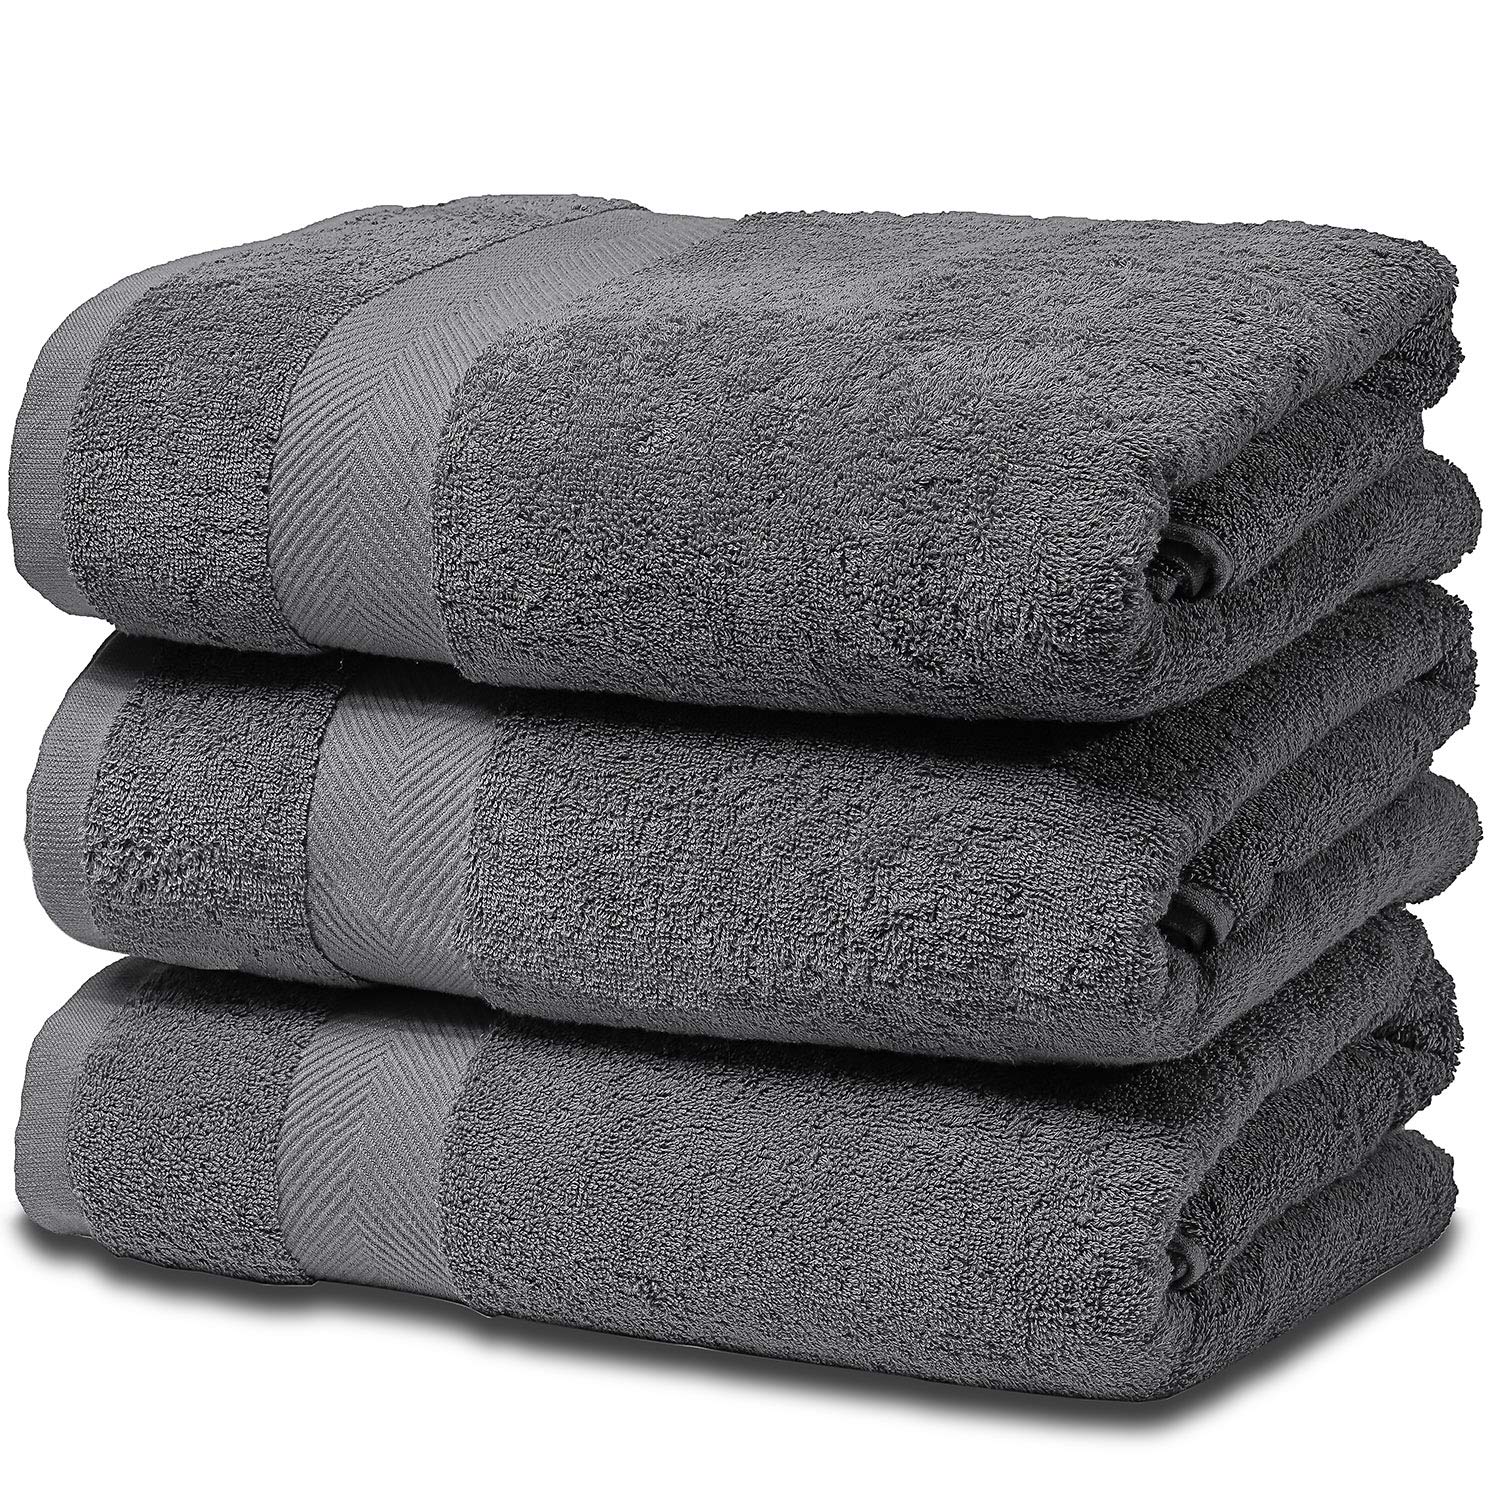 Book Cover SEMAXE Towel Luxury Hotel & Spa Quality Bath Towel Set for Bathroom .Soft,Plush and Highly Absorbent Towel (Gray, 3 Bath Towel)